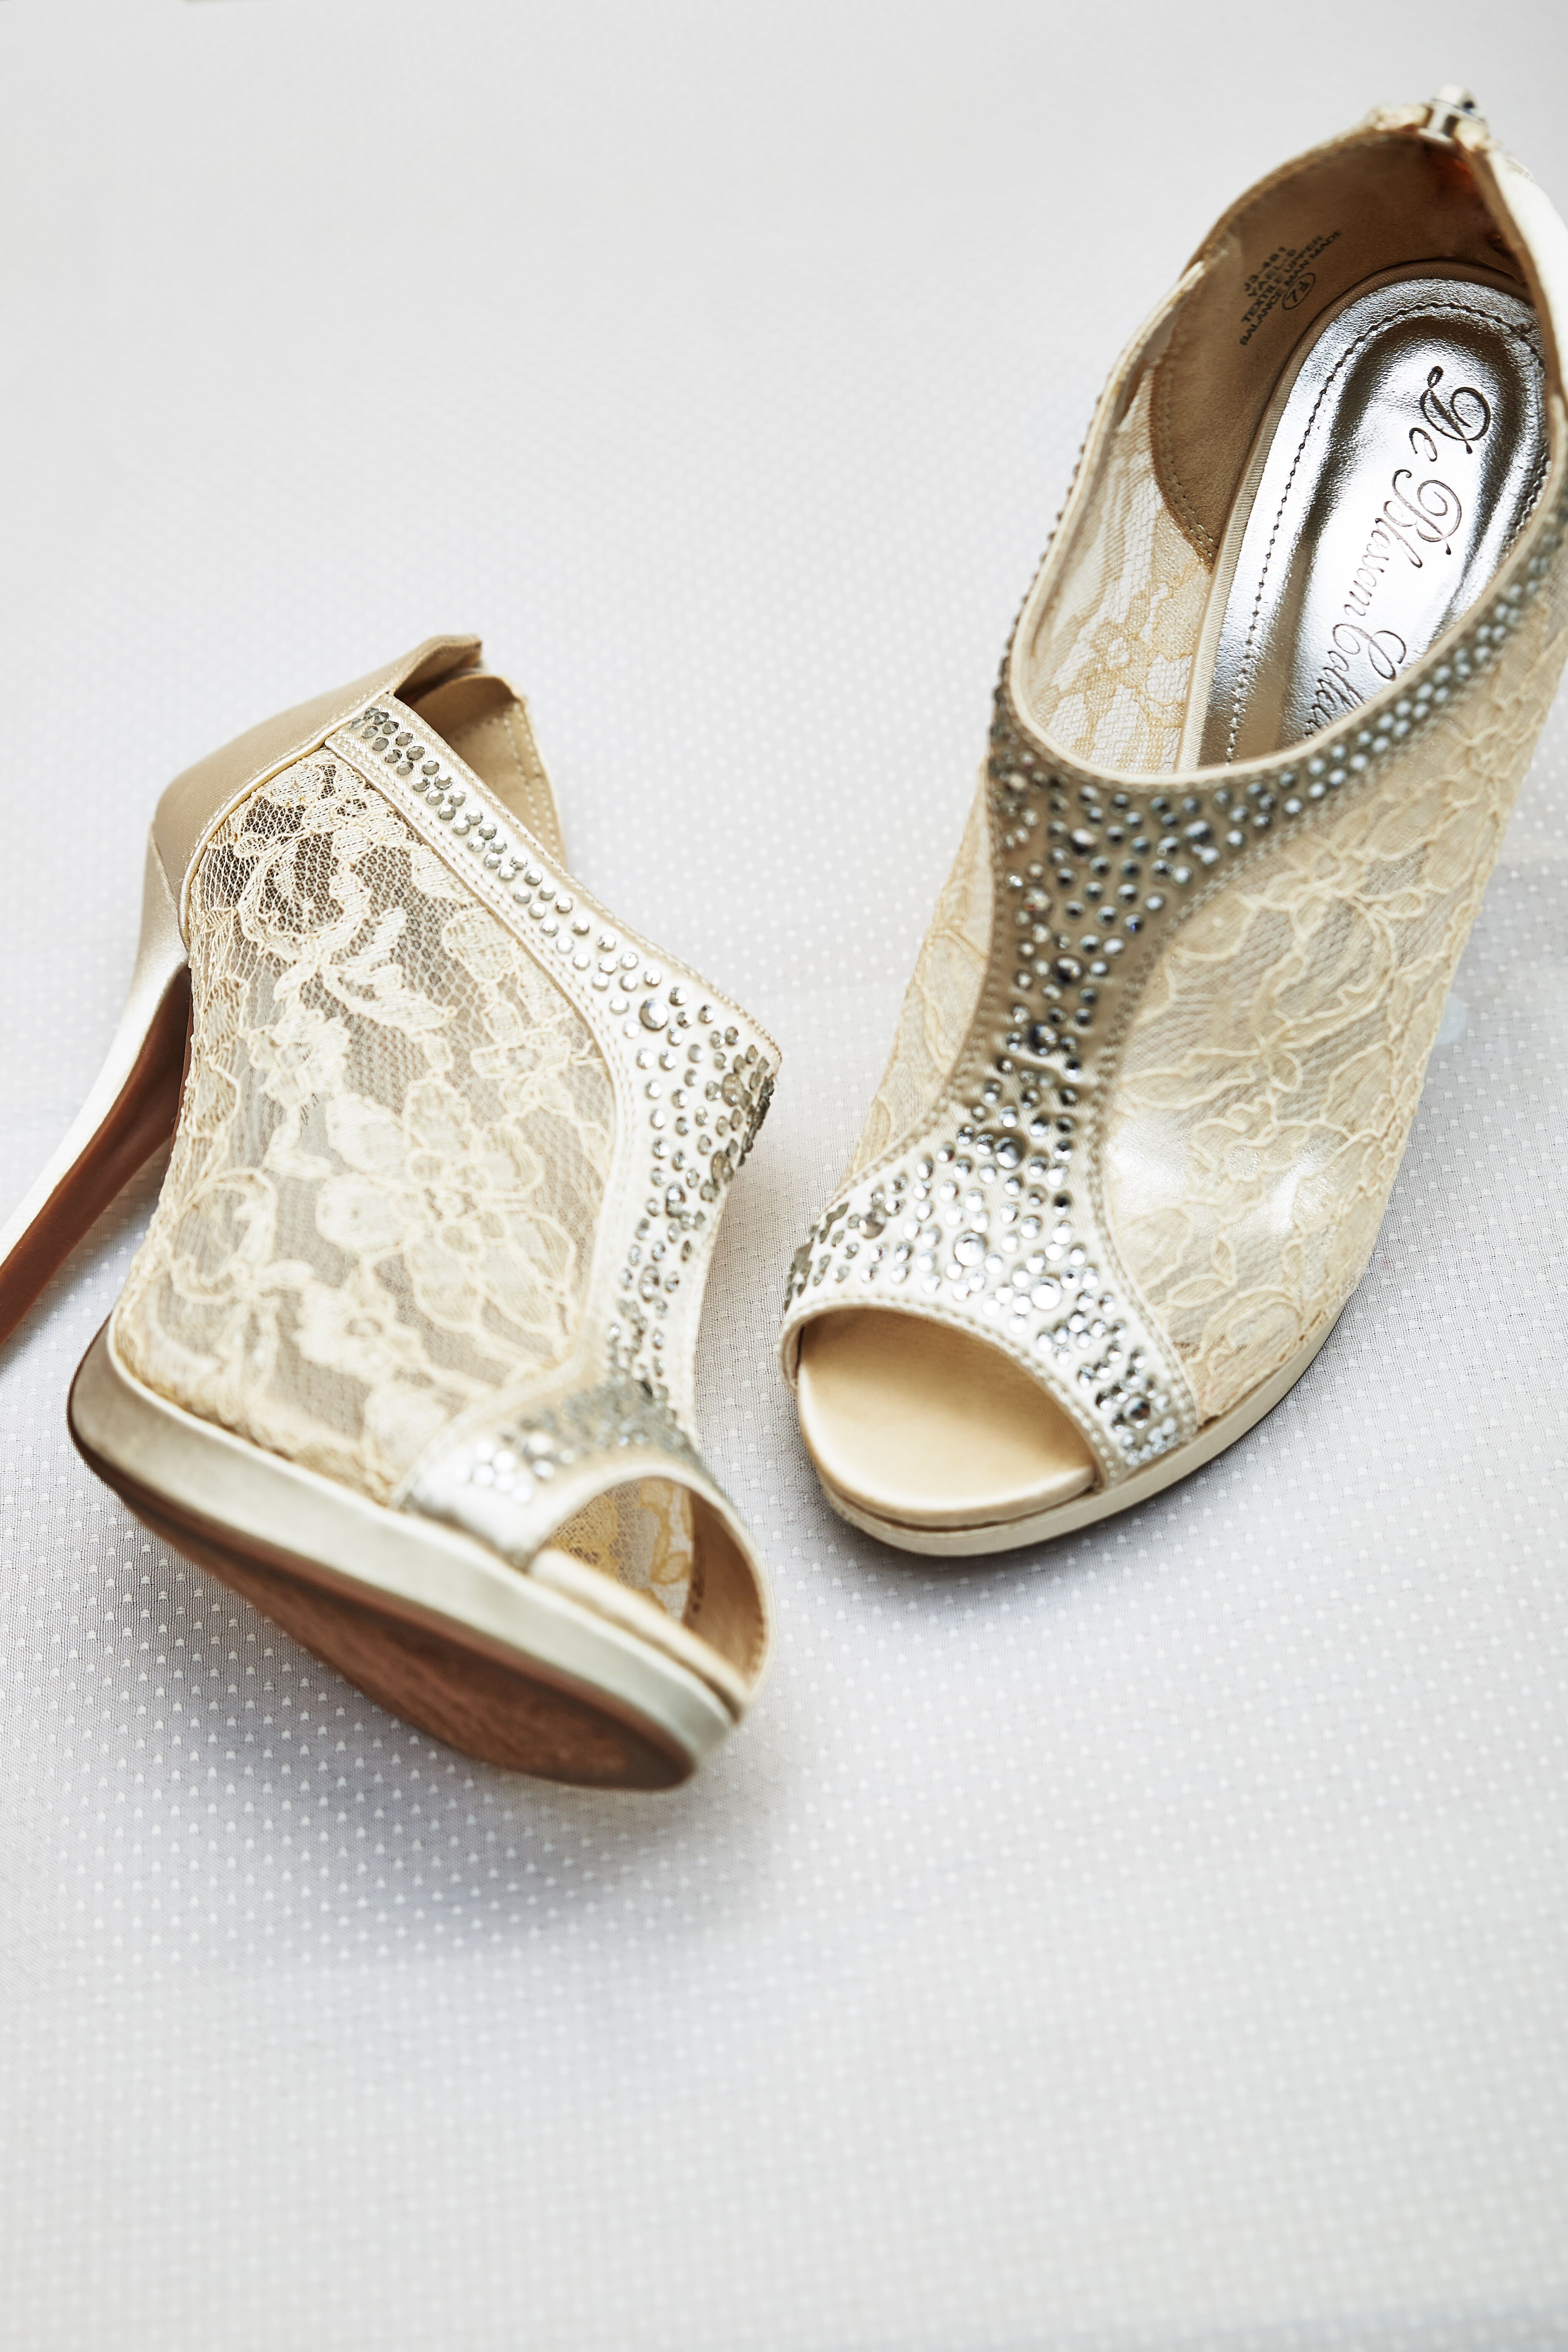 Champagne Colored Shoes with Lace